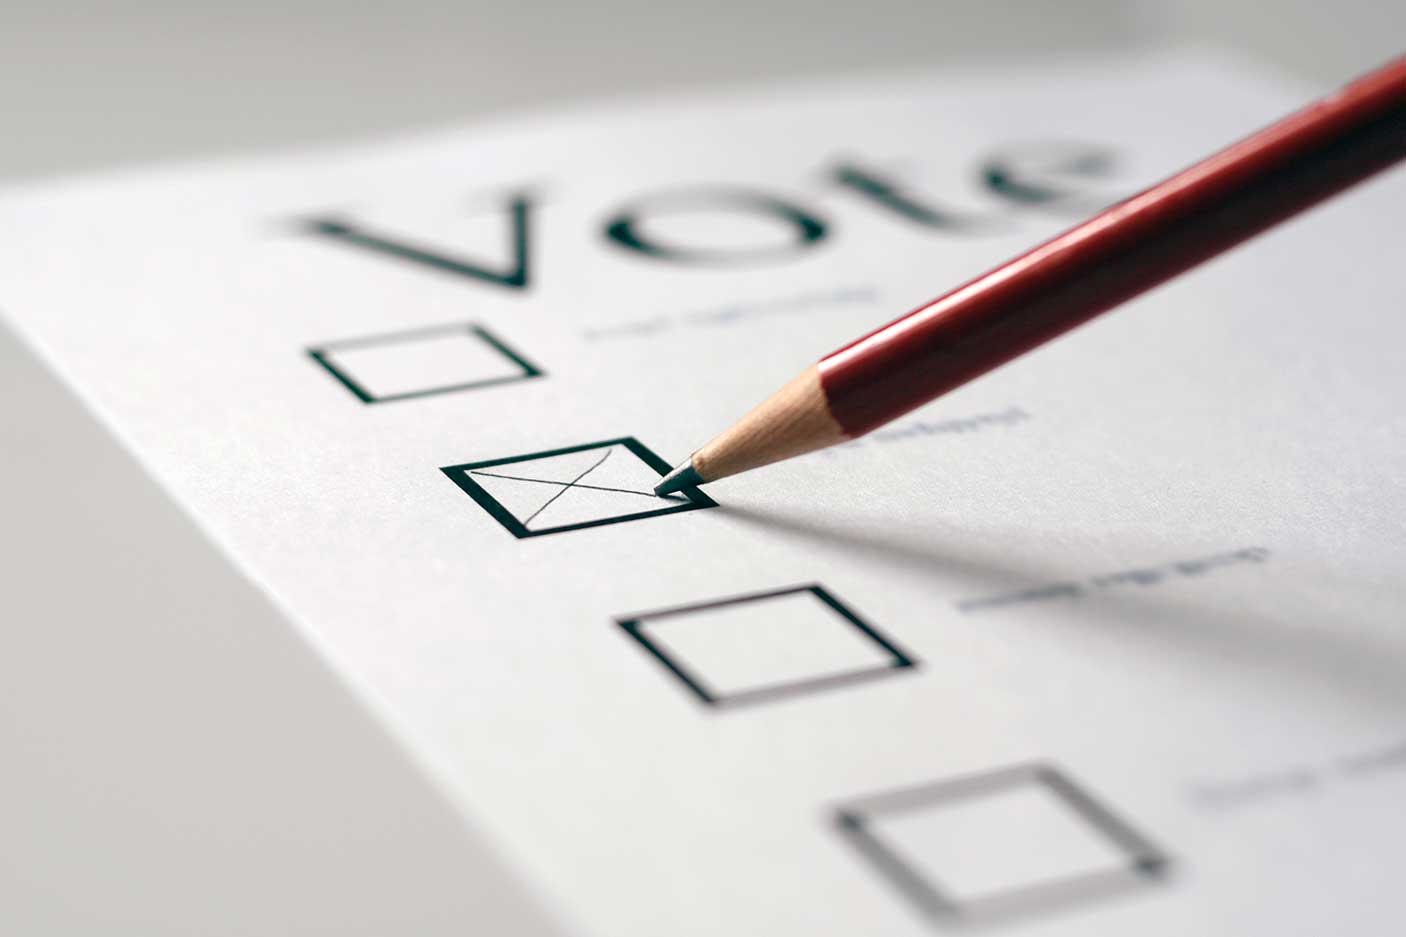 This is a voting card marked with an x in the second box with a pencil. The focus is on the pencil tip.